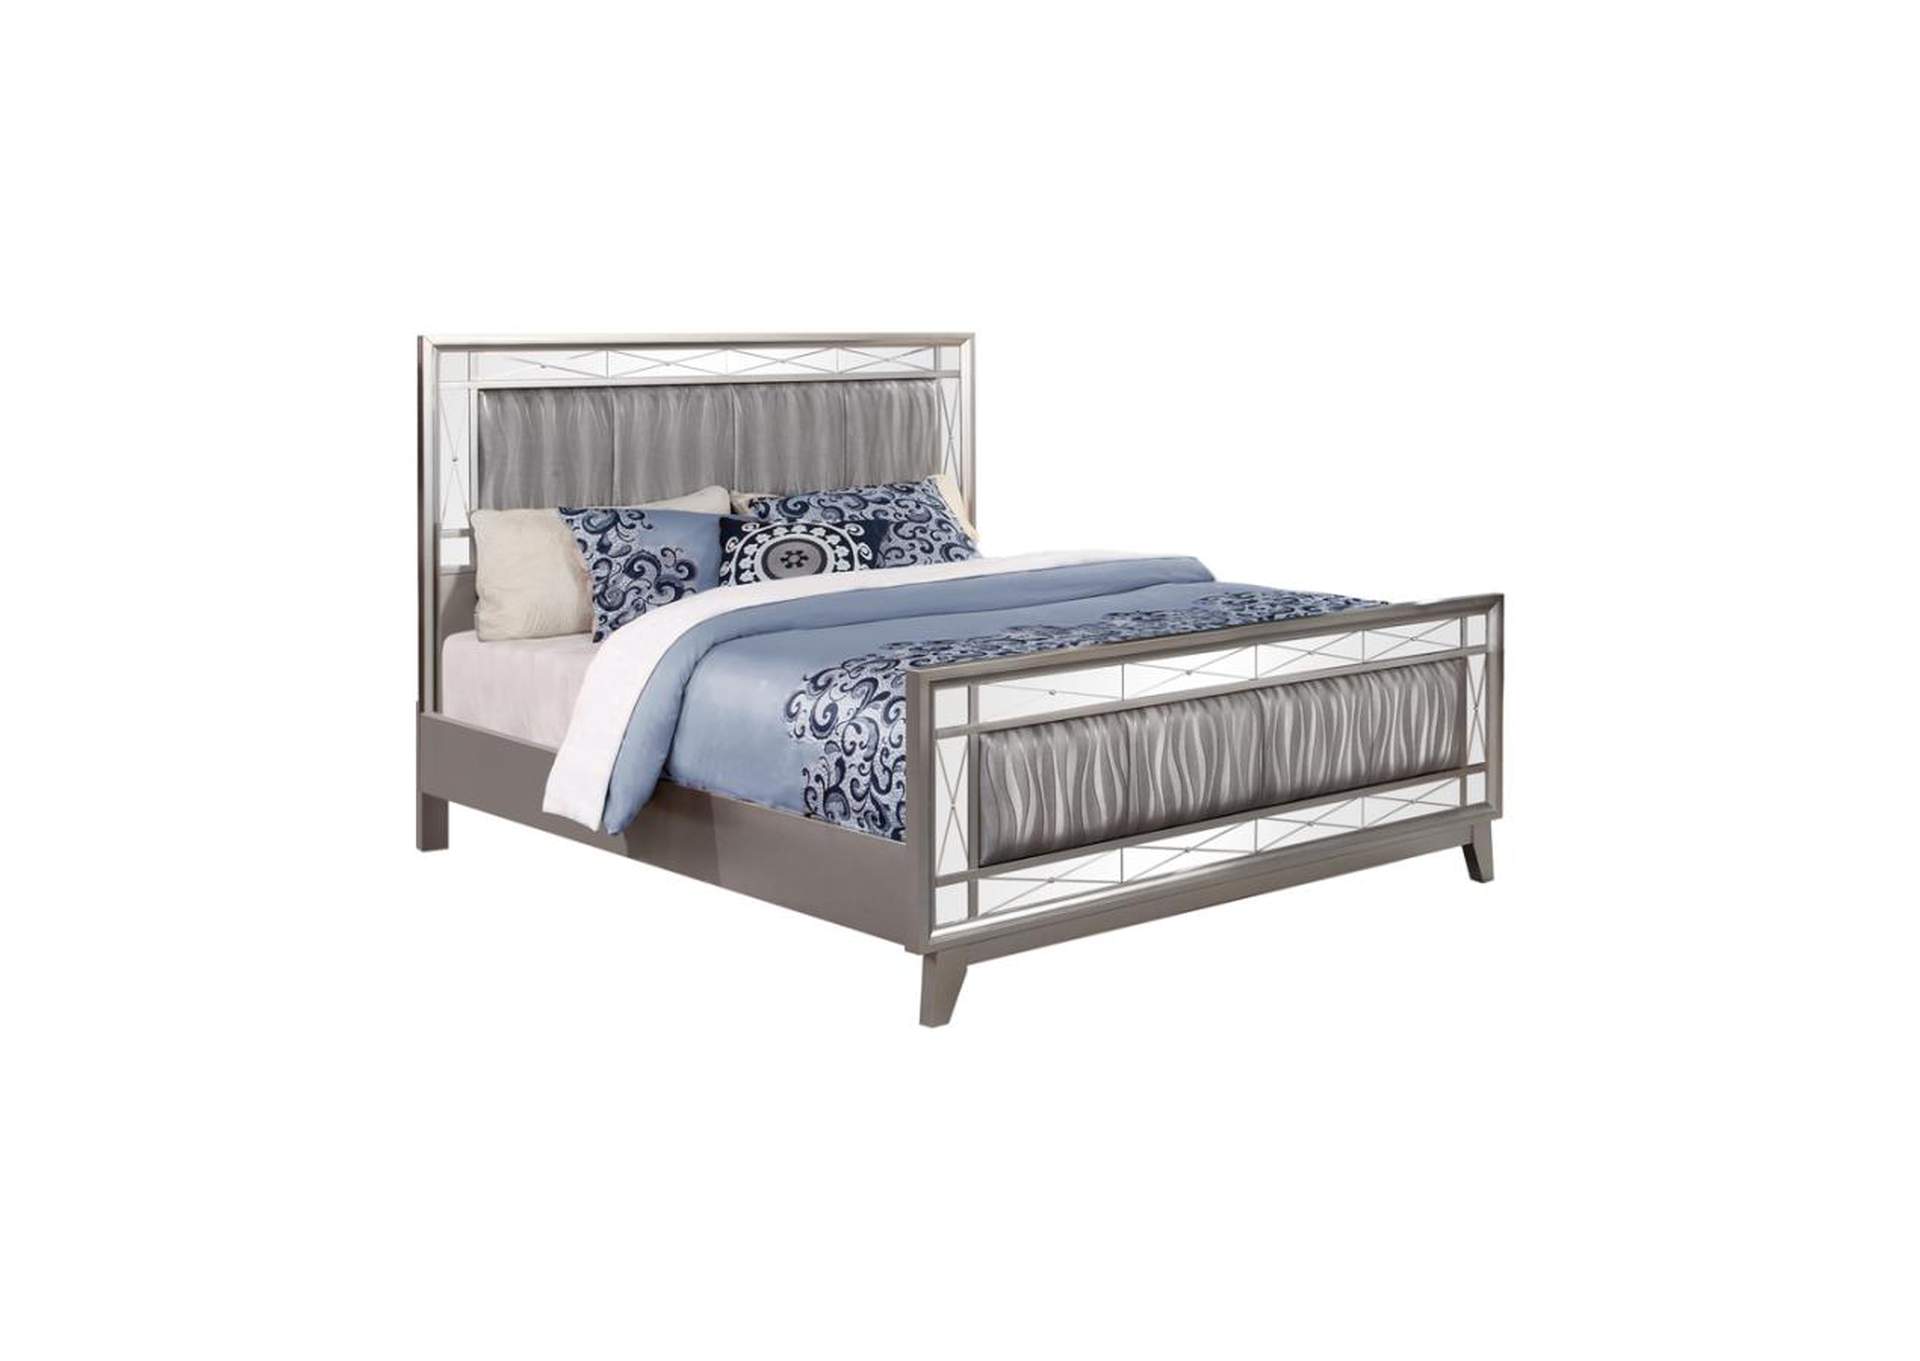 Leighton Queen Panel Bed with Mirrored Accents Mercury Metallic,Coaster Furniture